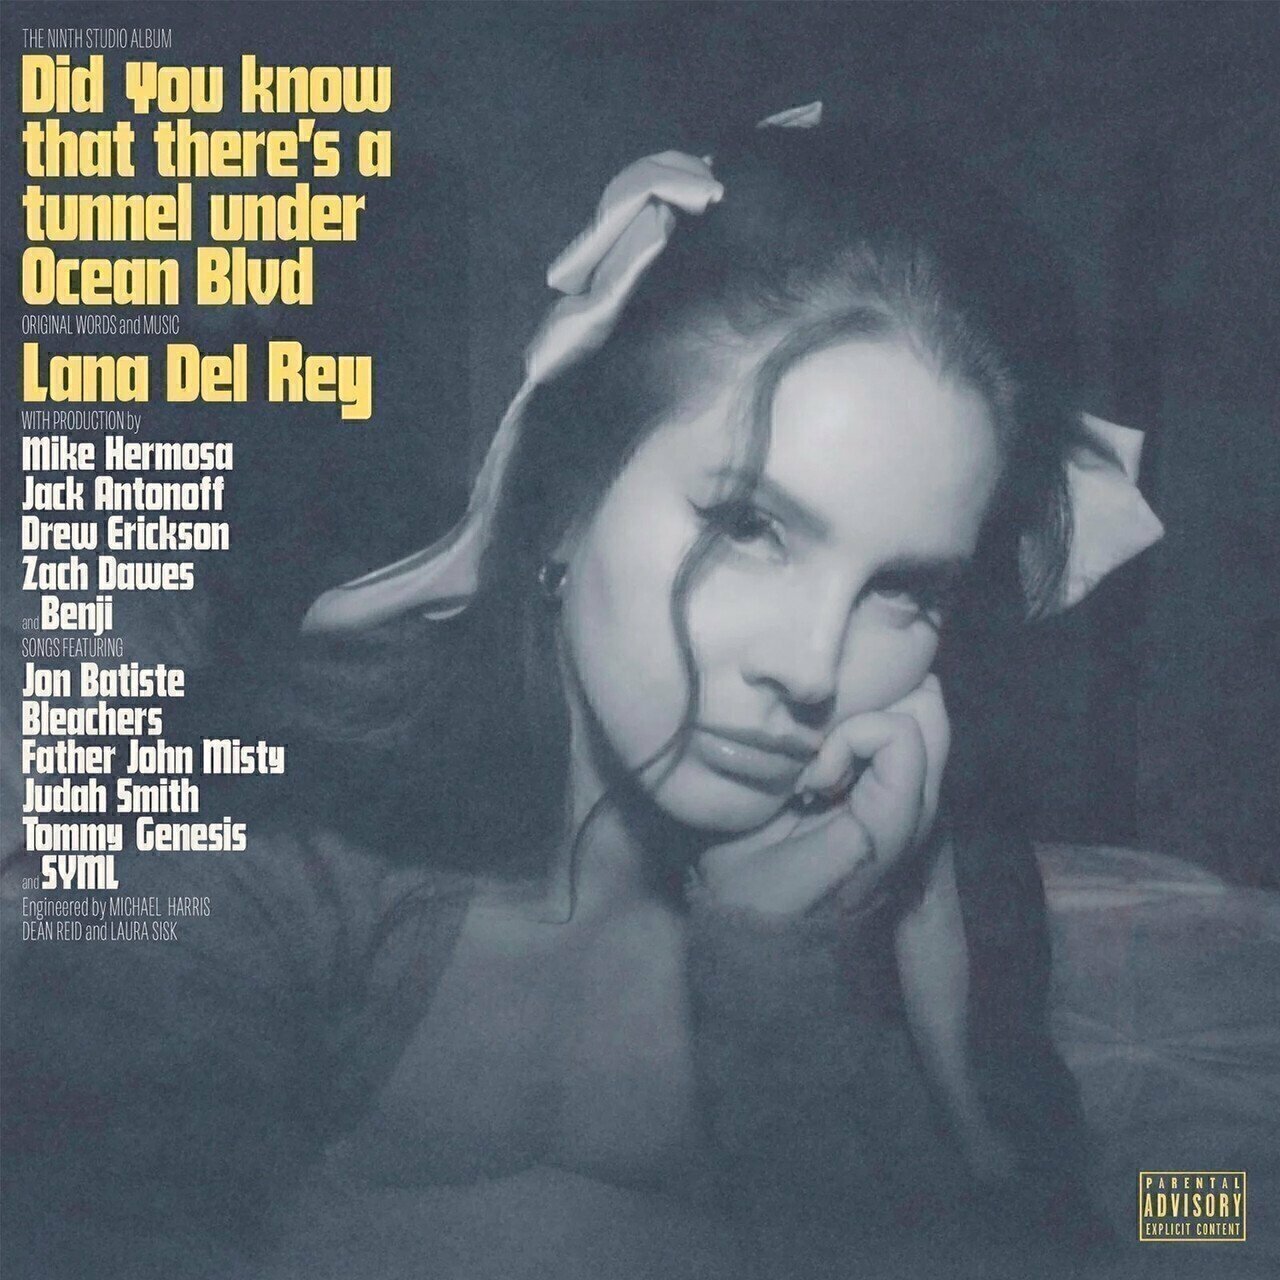 Виниловая пластинка Lana Del Rey - Did You Know That There's A Tunnel Under Ocean Blvd 2LP